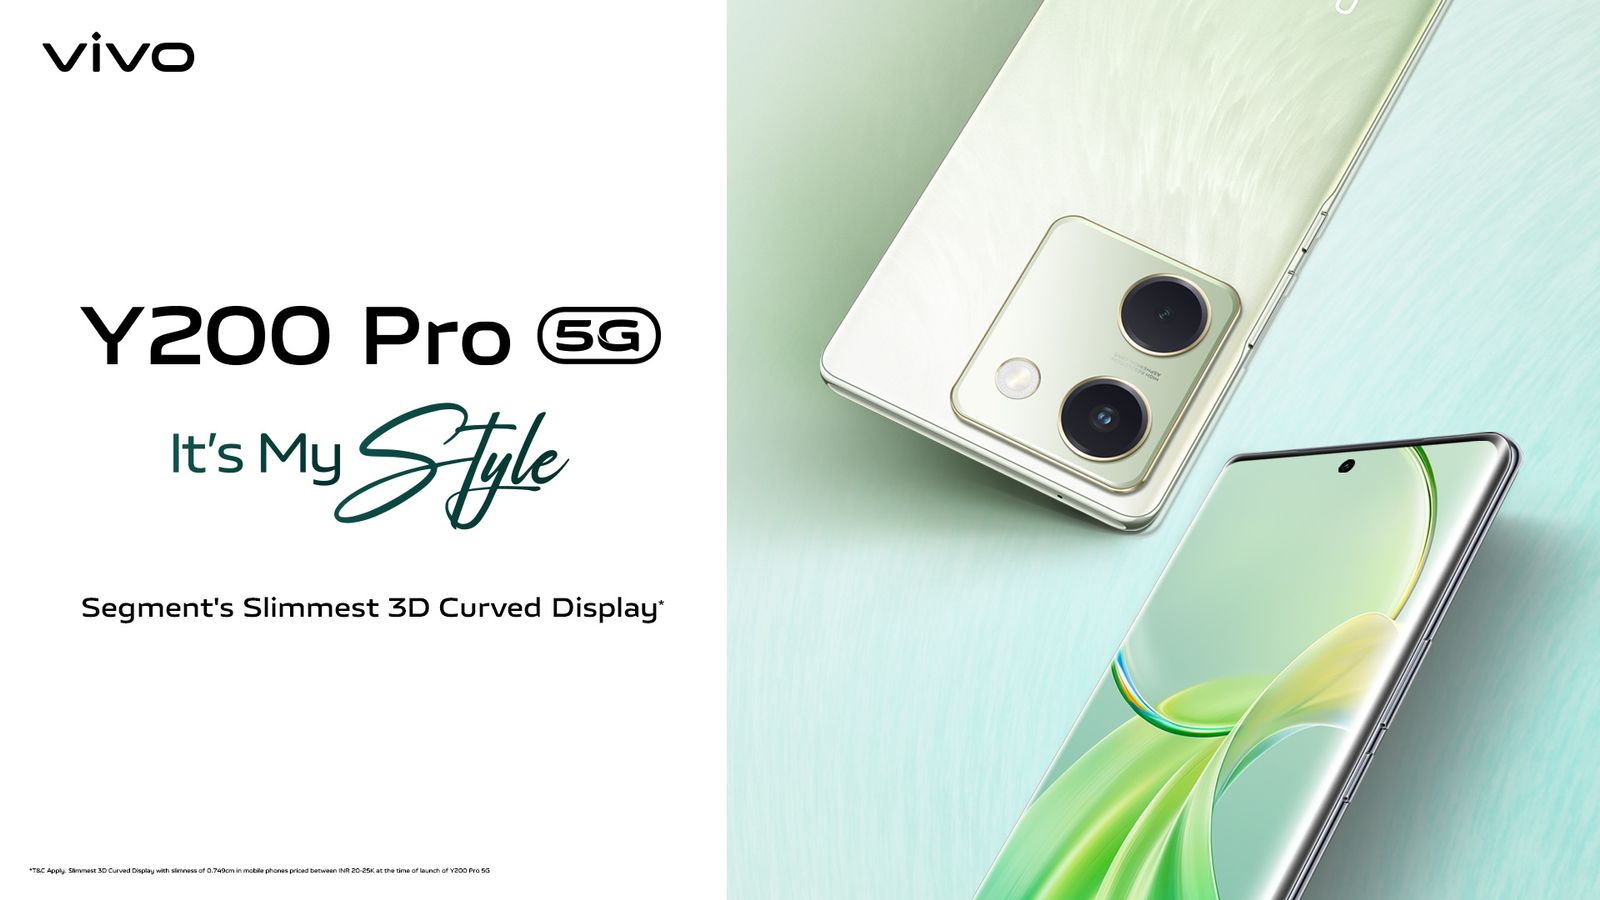 200 Pro 5G has been launched in India for Rs 24,999